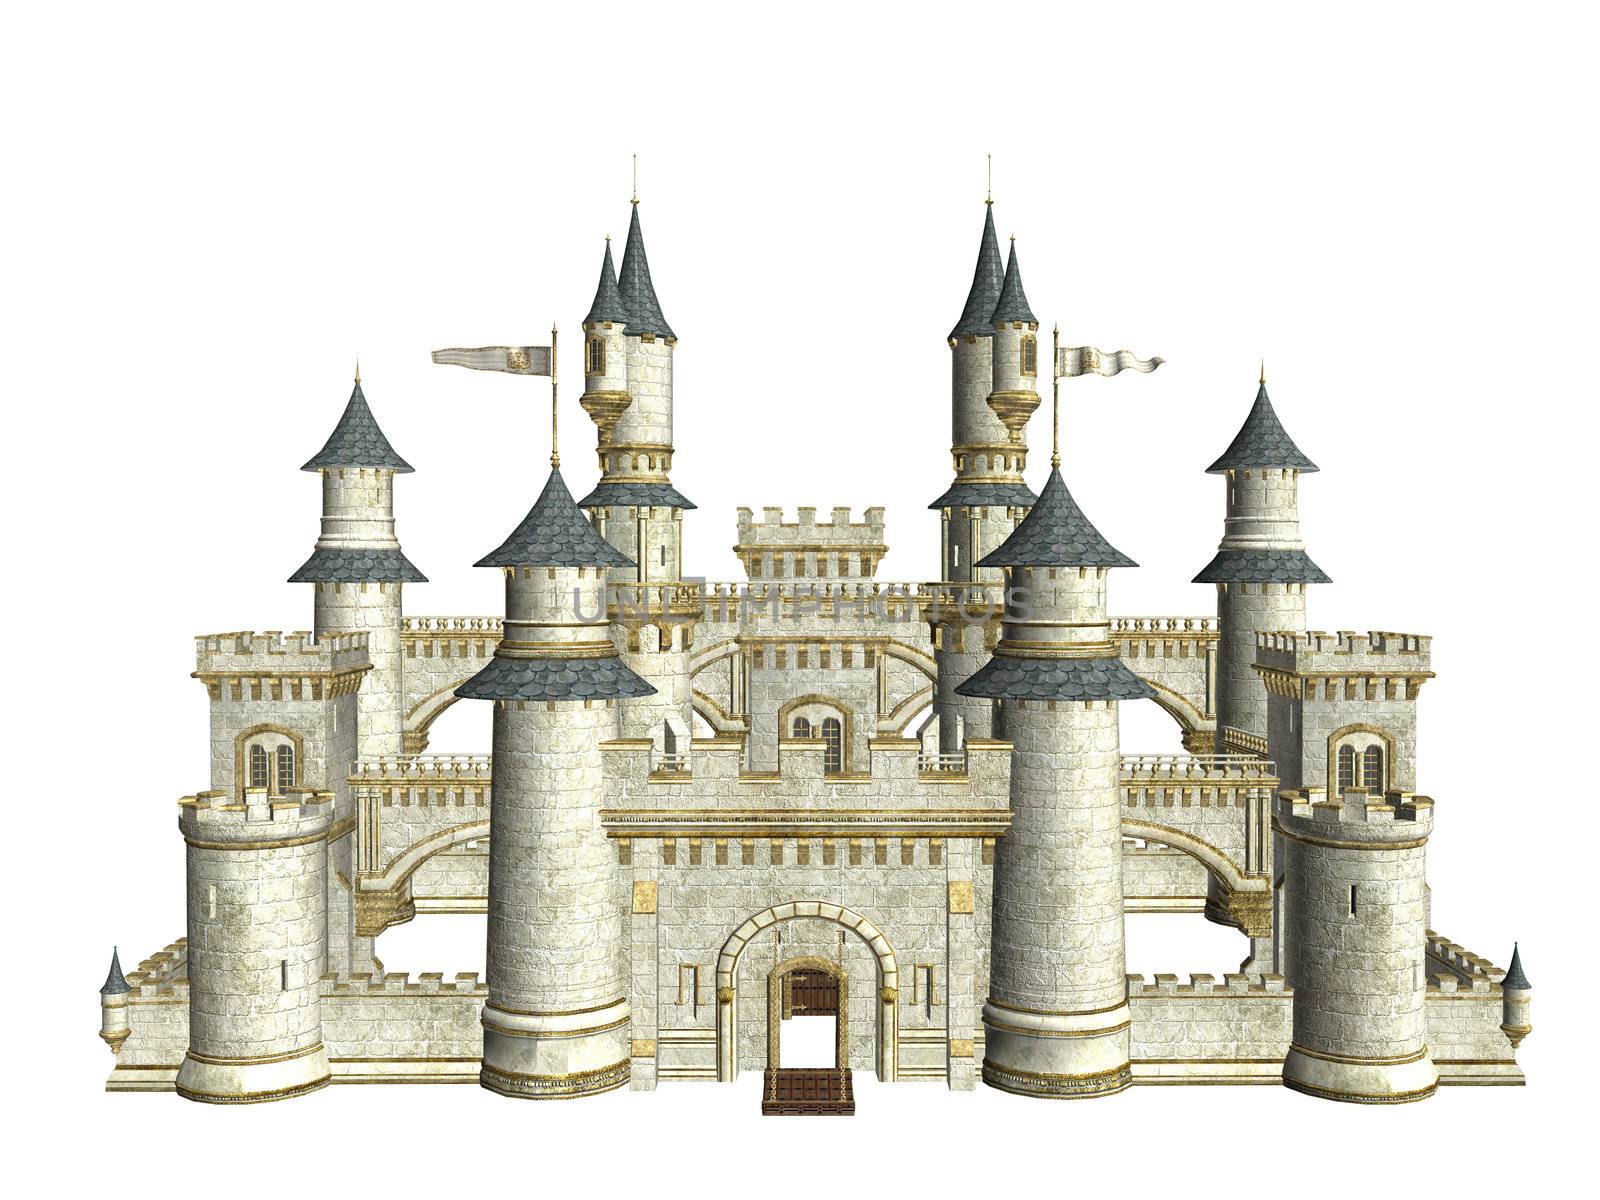 Fairytale story castle on a white background